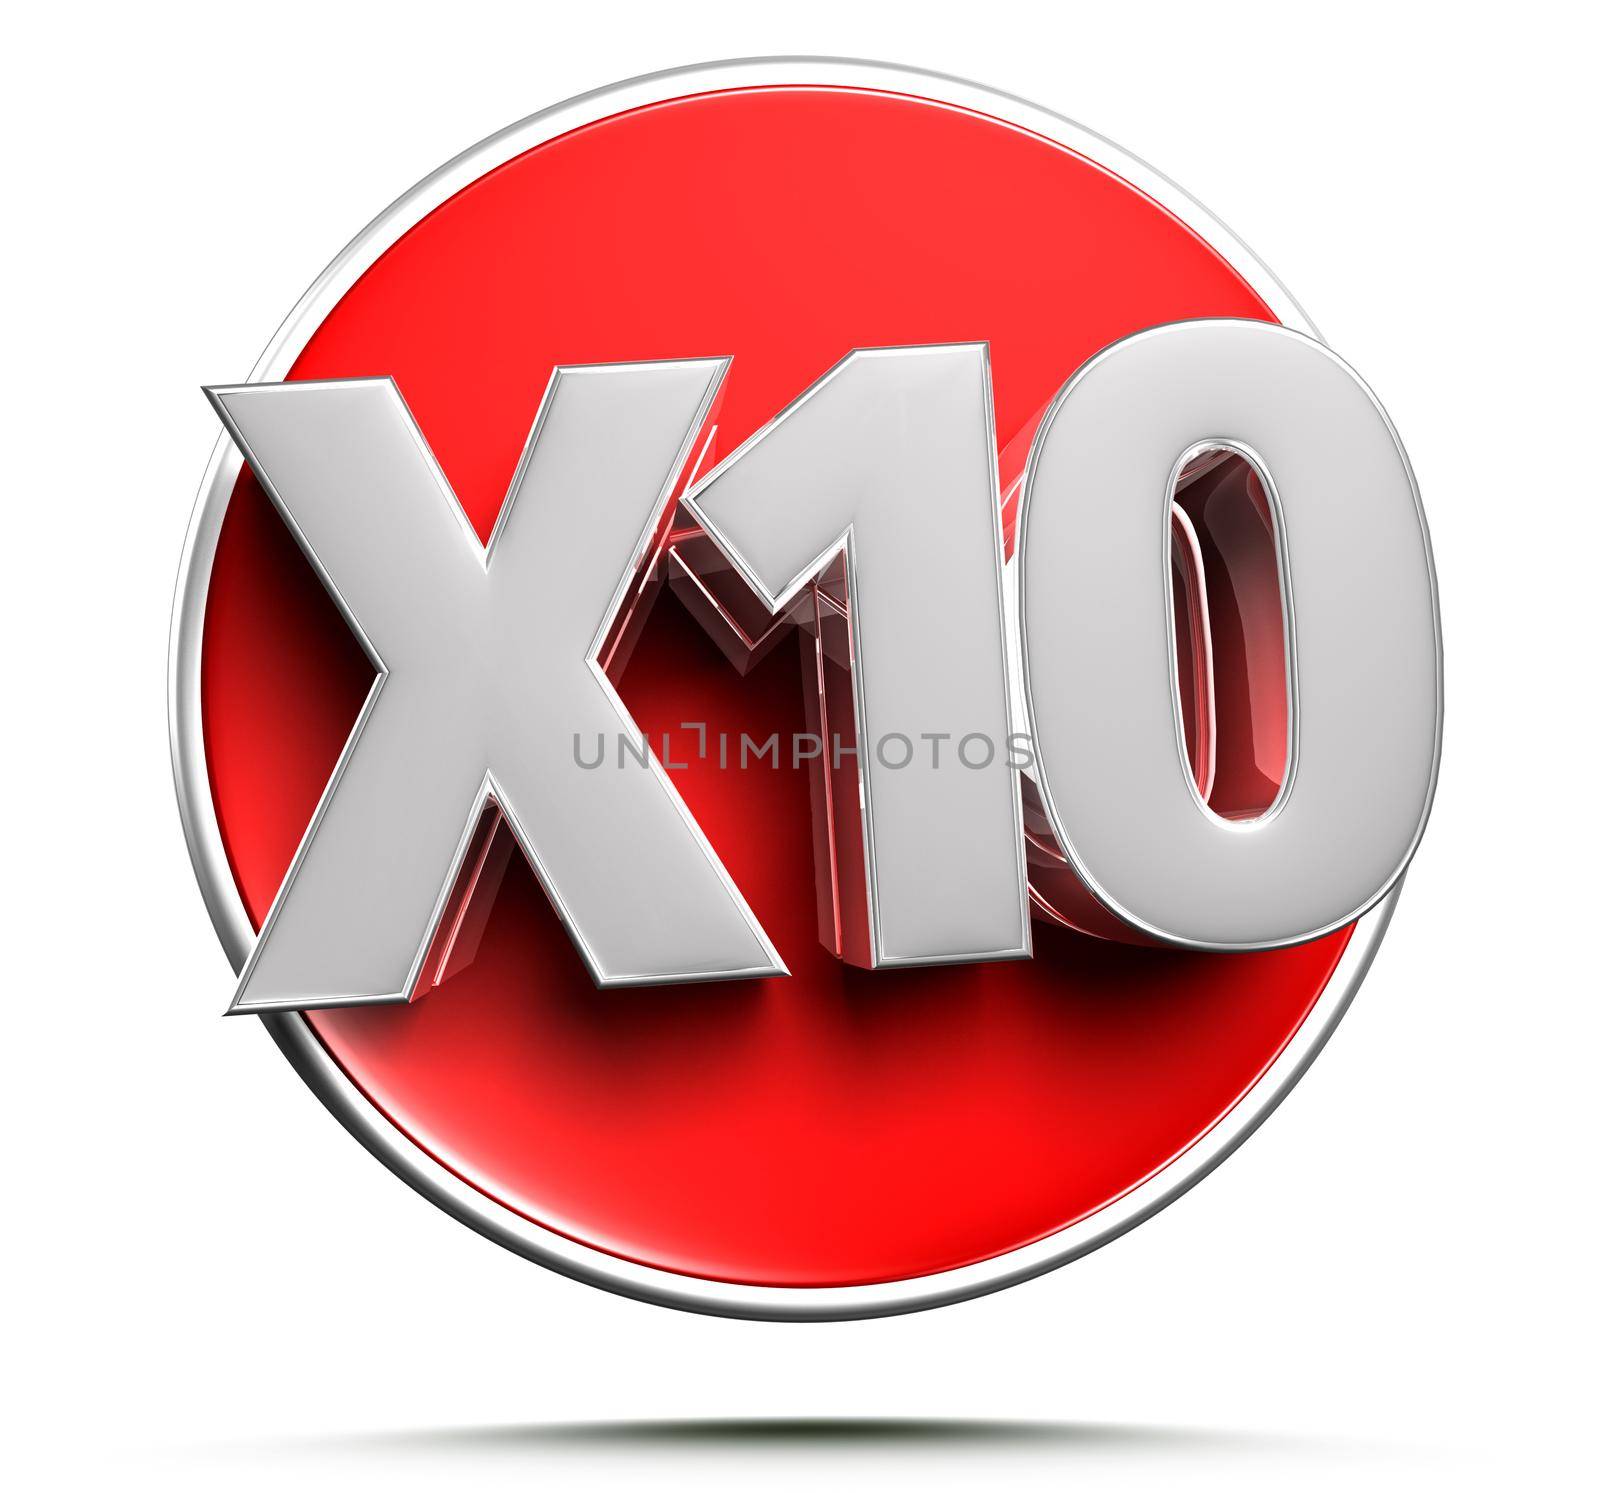 x10 red circle 3D illustration on white background with clipping path. by thitimontoyai